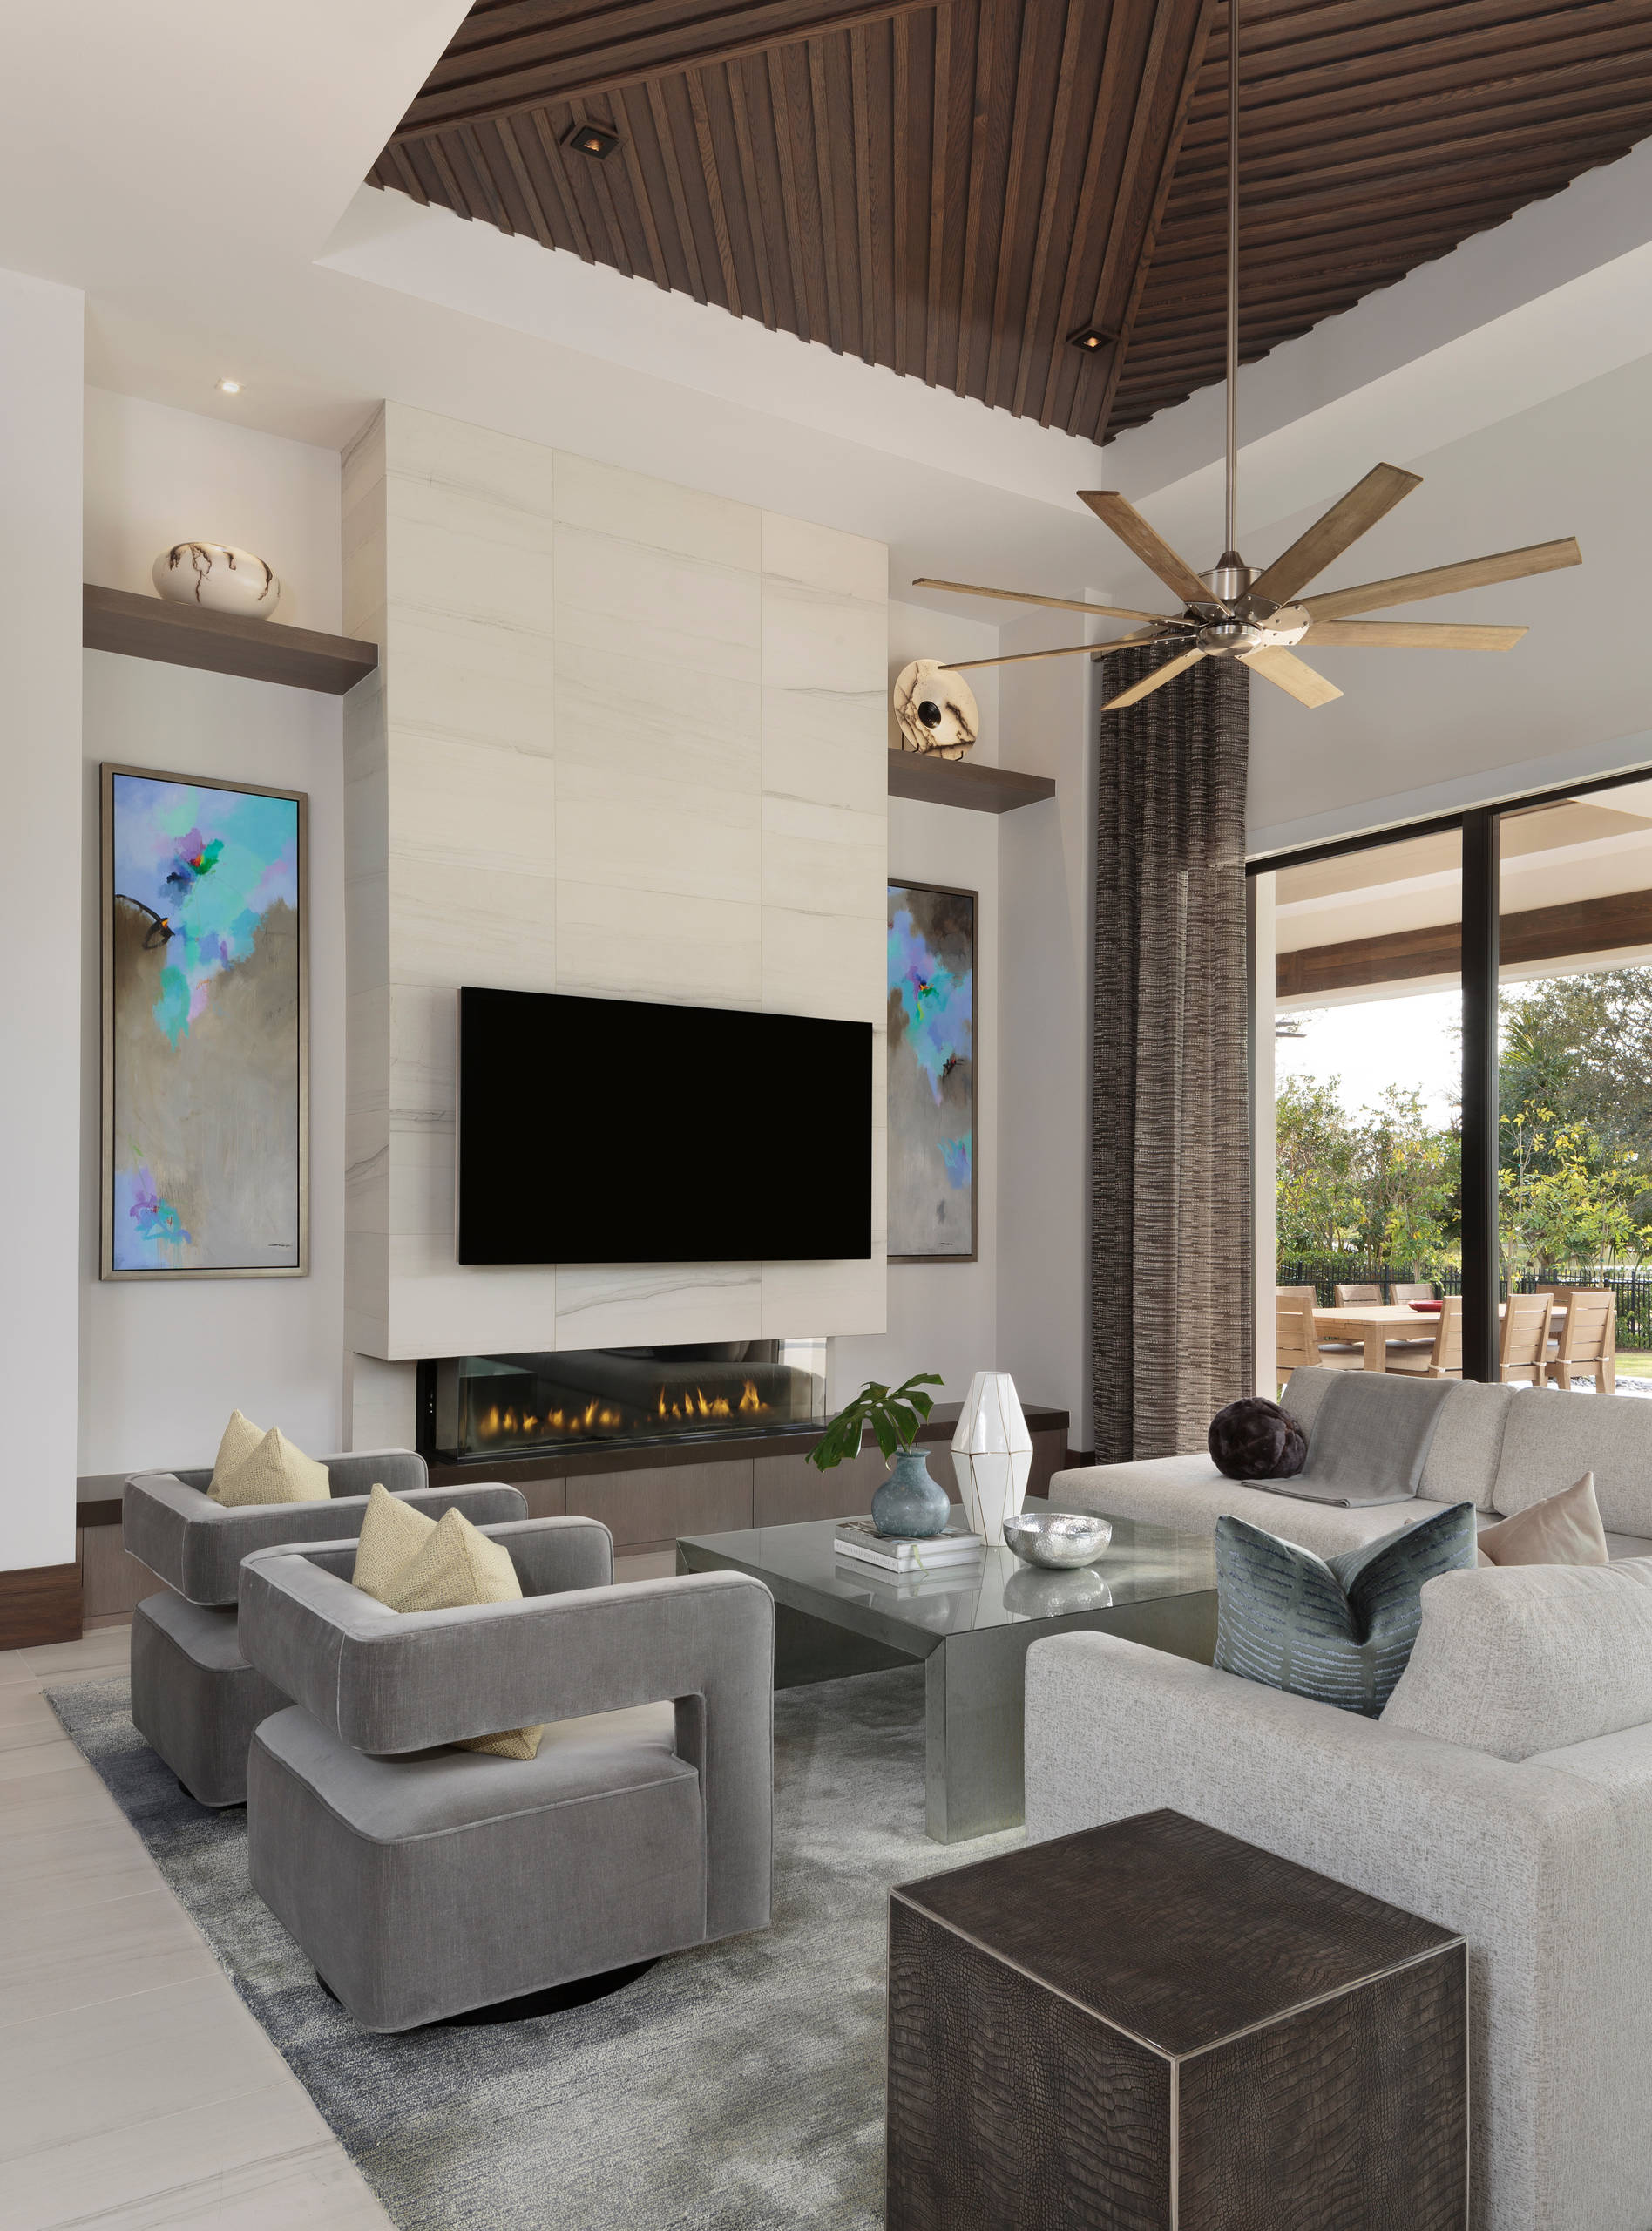 75 Beautiful Modern Living Room With A Wall Mounted Tv Pictures Ideas April 2021 Houzz